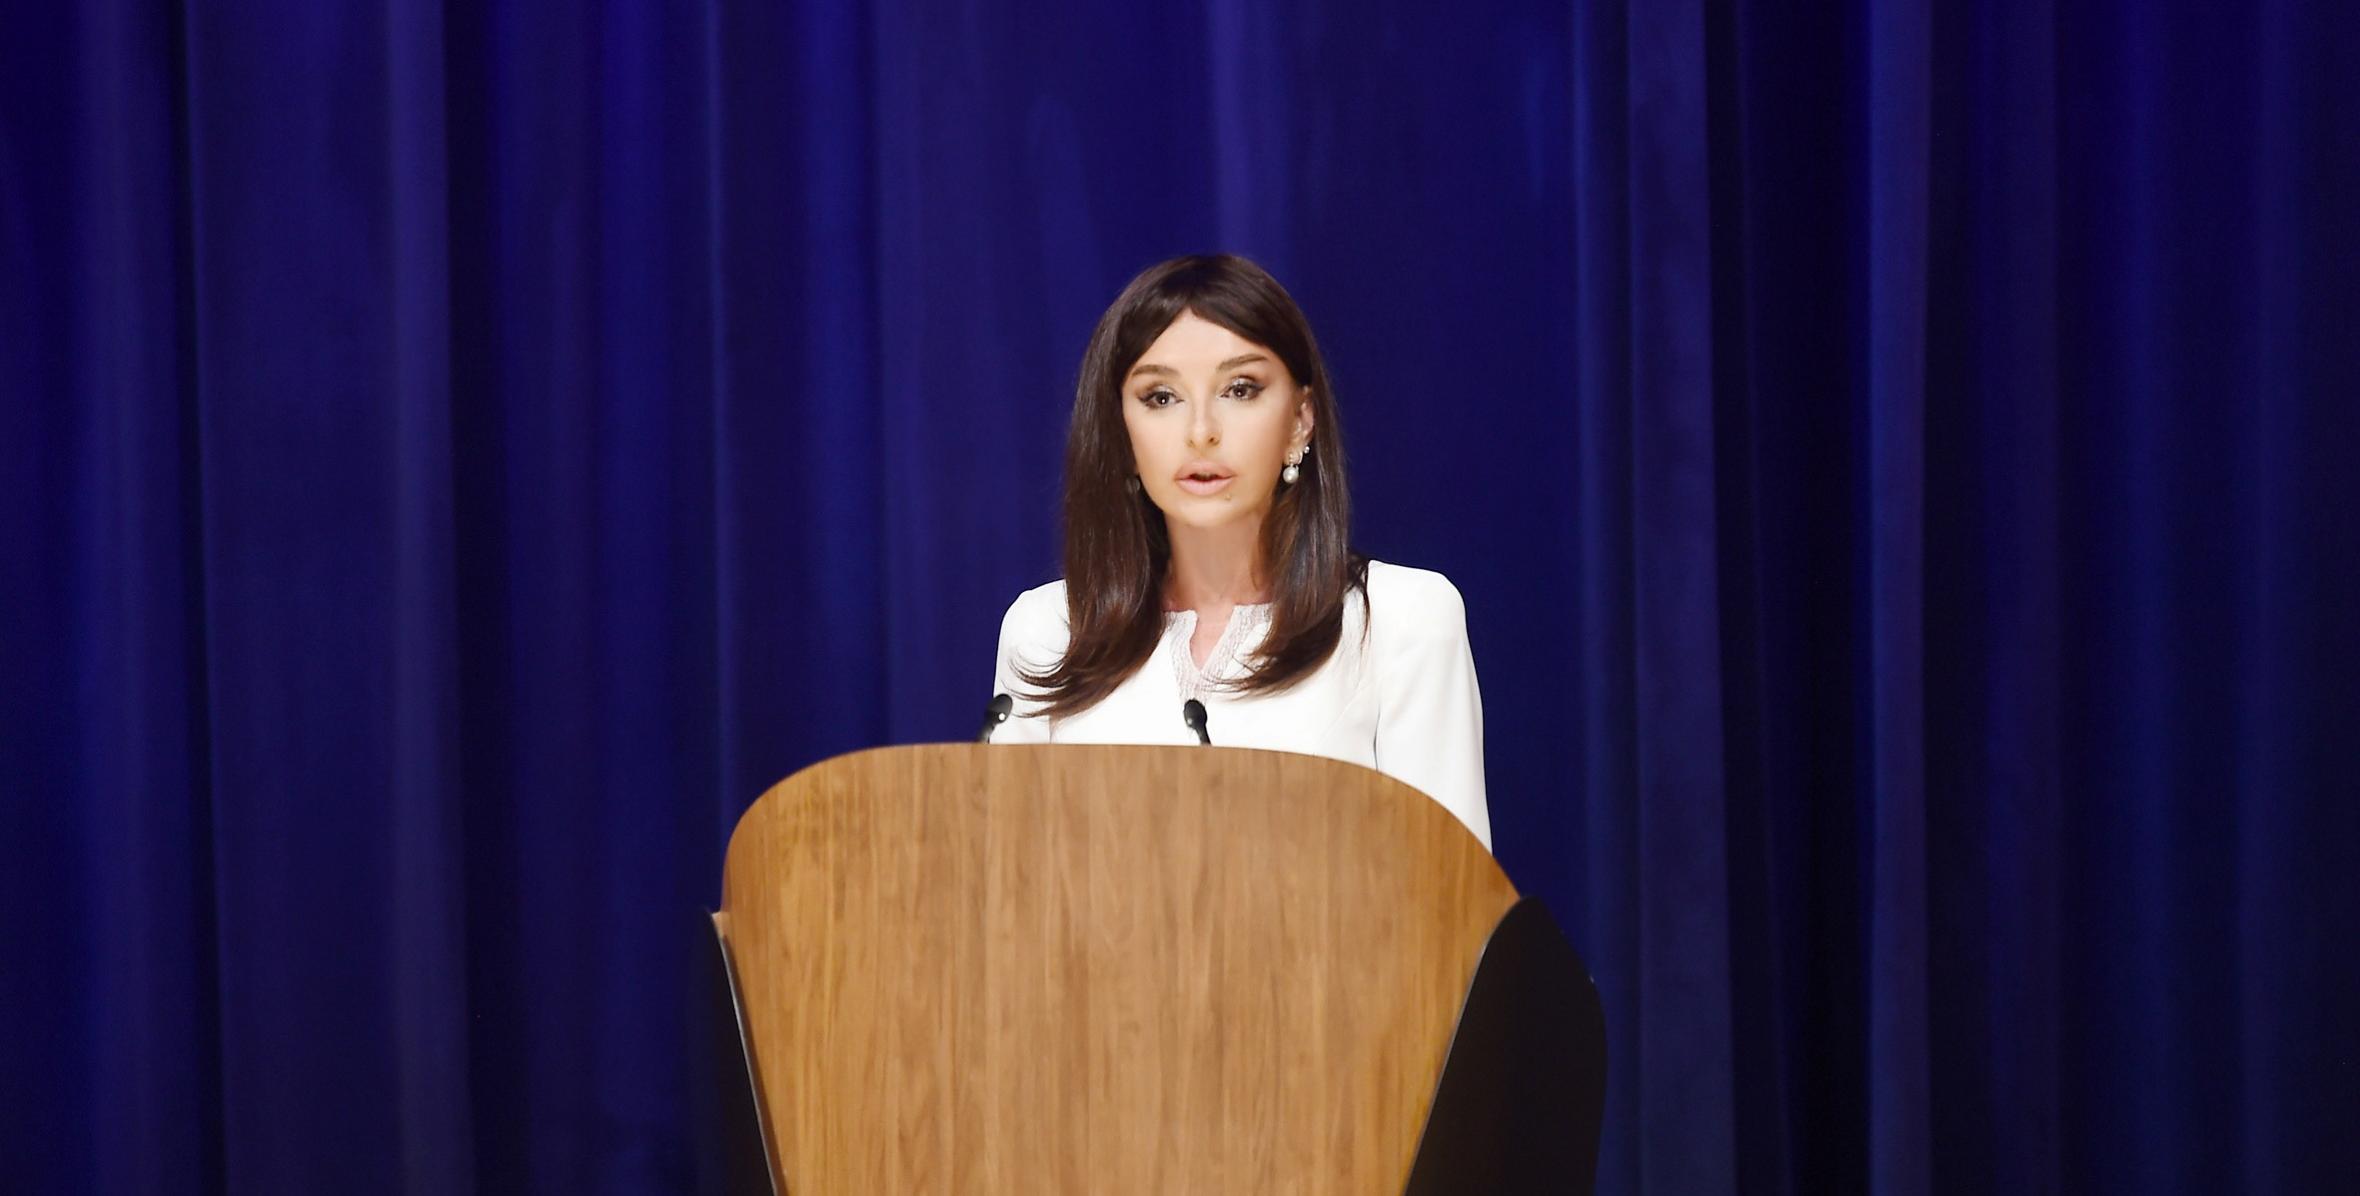 First Vice-President Mehriban Aliyeva attends the opening ceremony of the 43rd session of the UNESCO World Heritage Committee in Baku